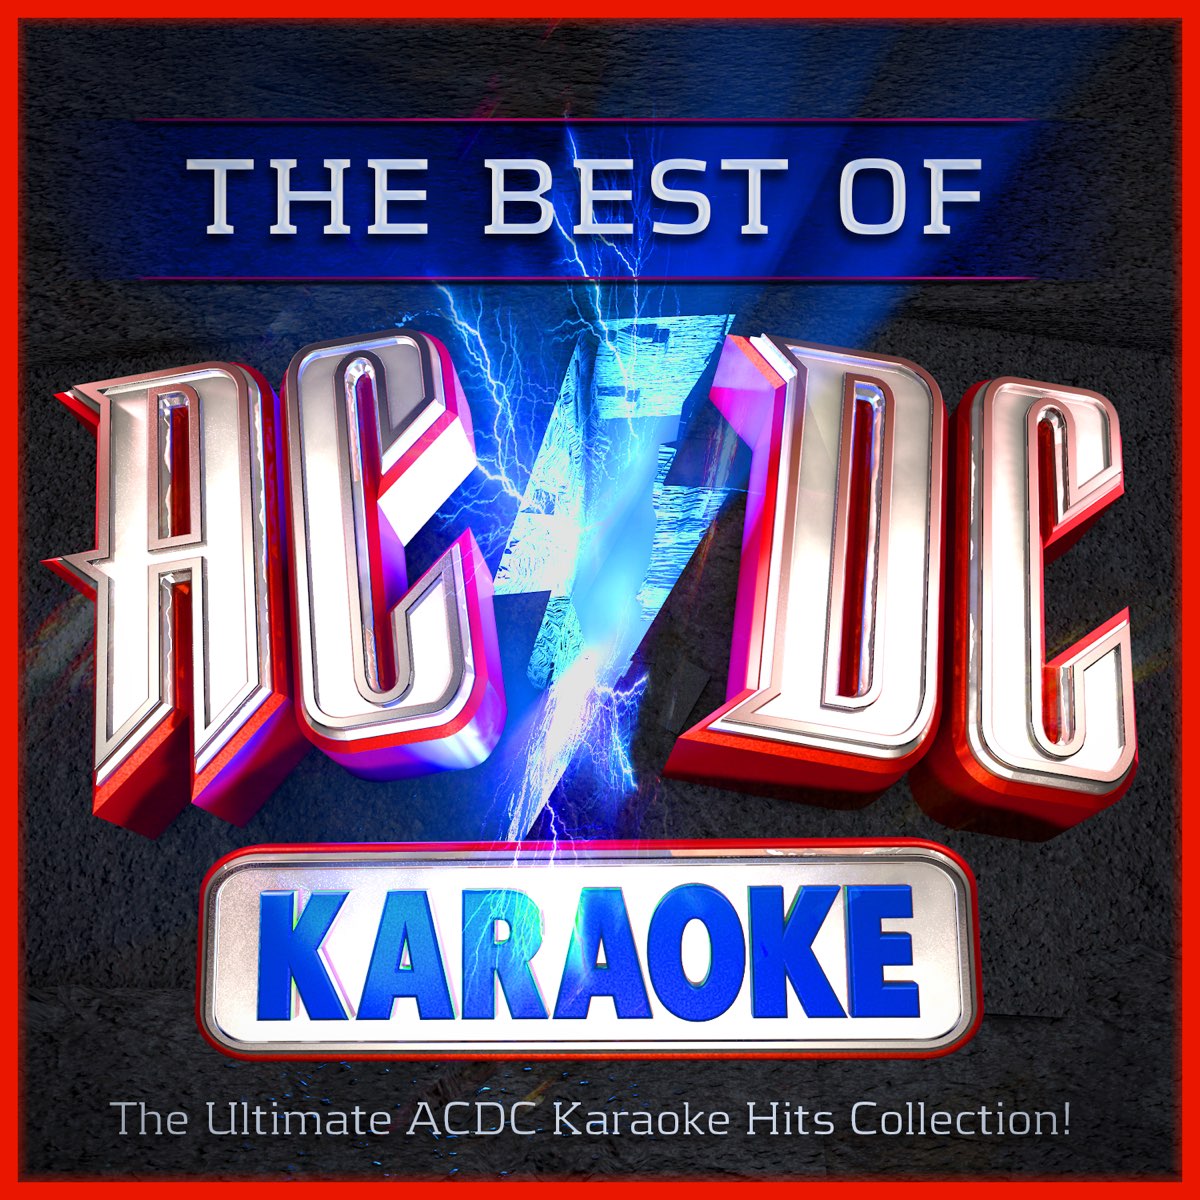 The Best of AC/DC Karaoke - The Ultimate ACDC Karaoke Hits Collection by  The Karaoke Rockstars on Apple Music